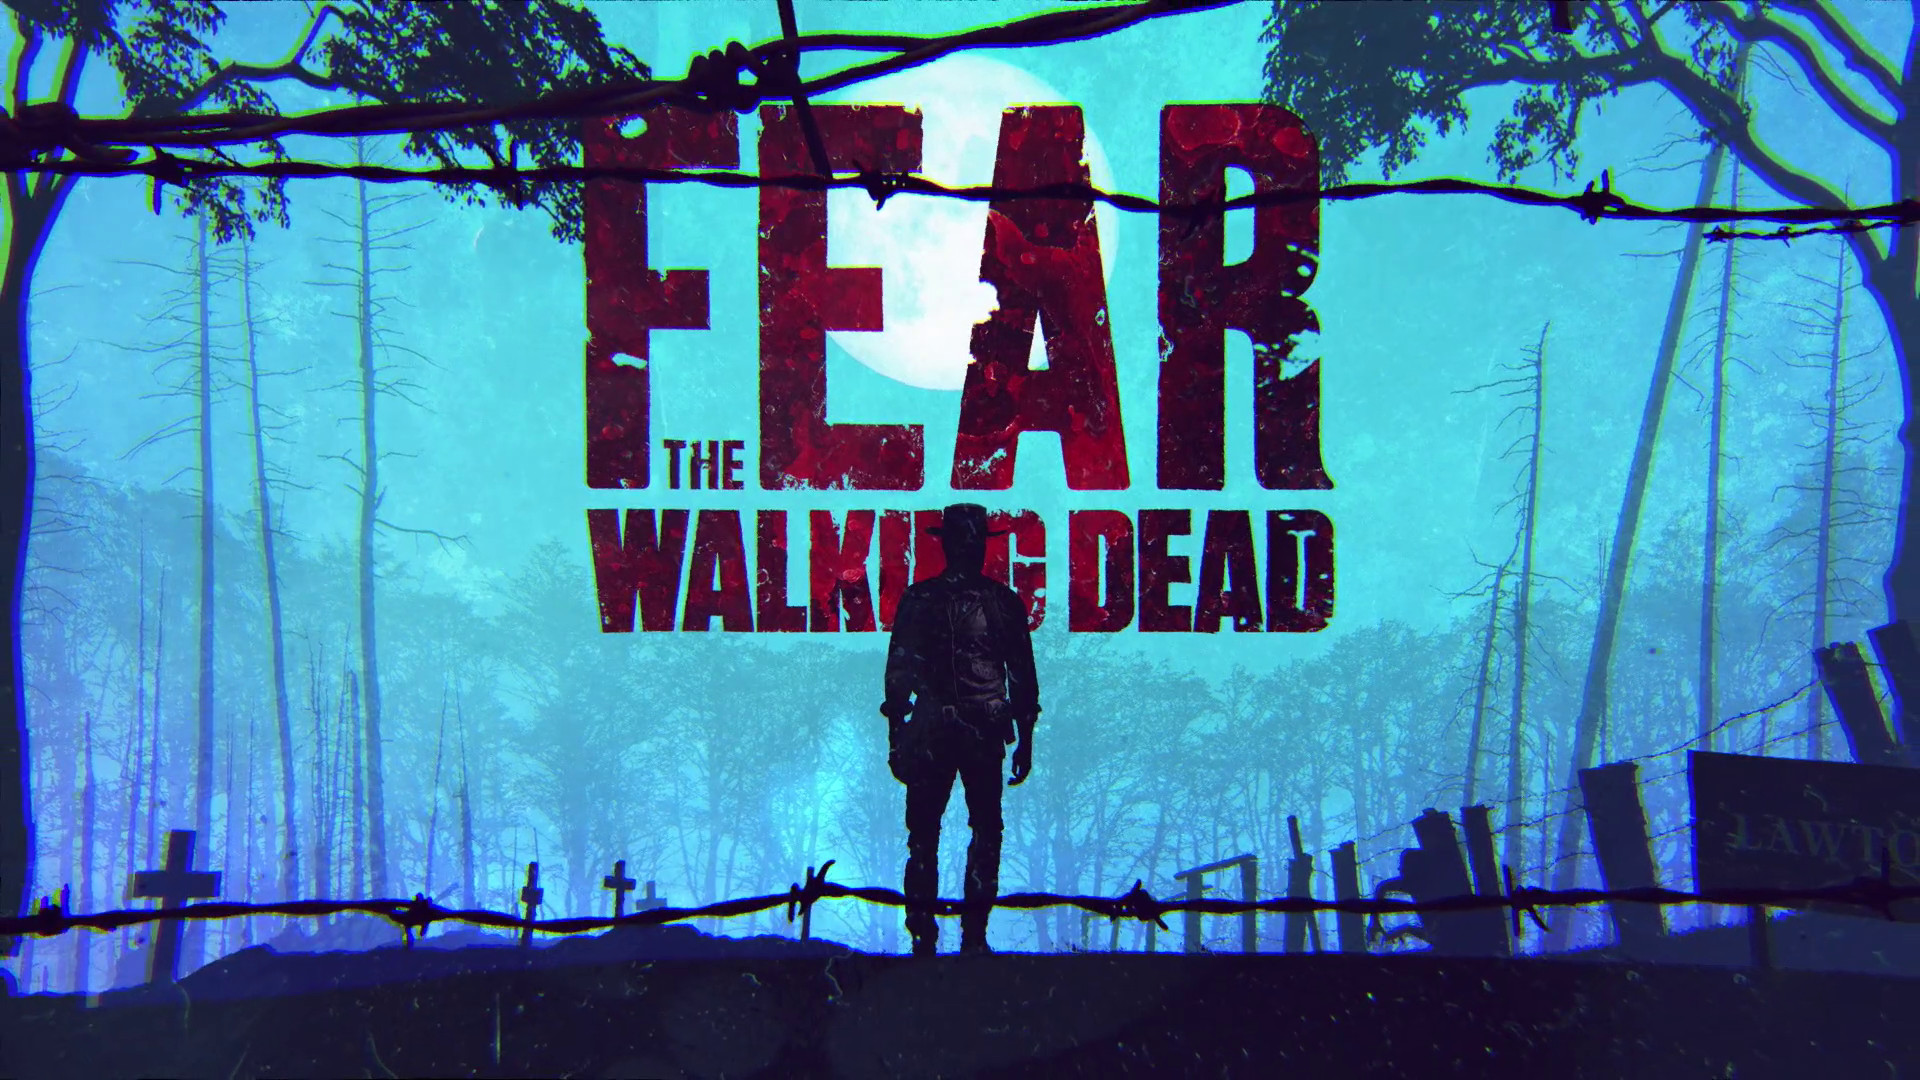 fear of the walking dead theme song